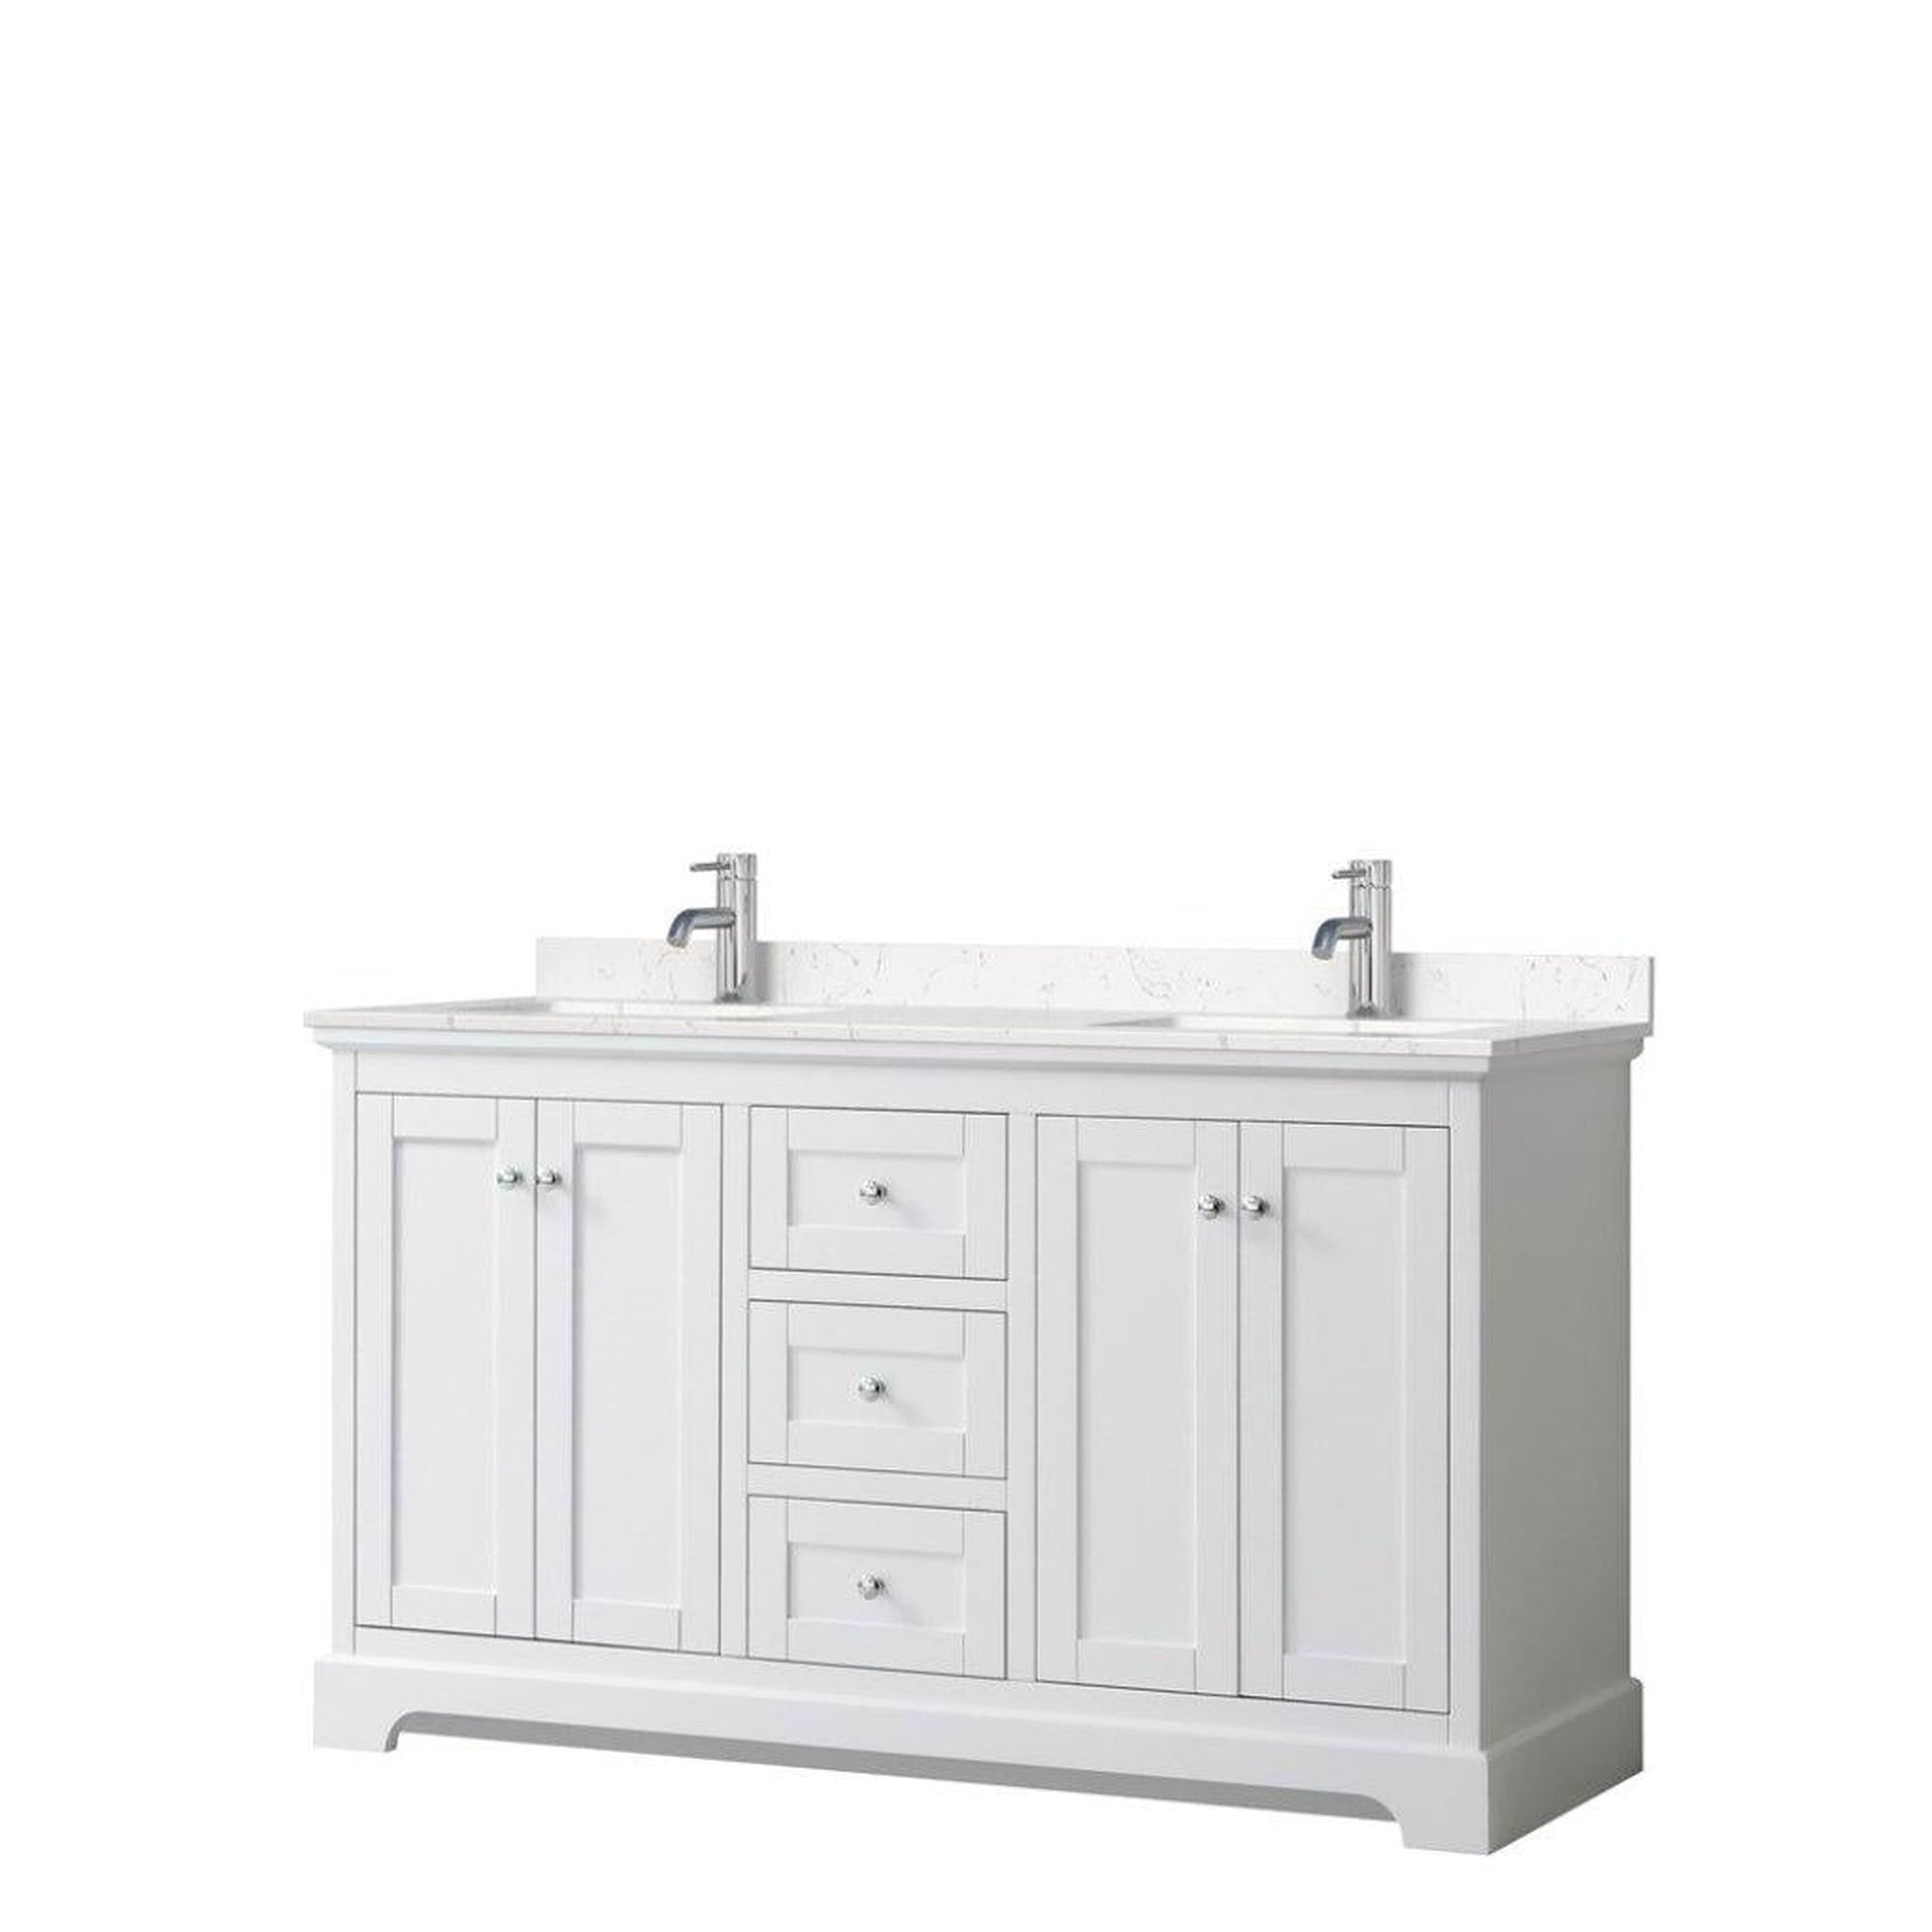 Wyndham Collection Avery 60" White Double Bathroom Vanity, Light-Vein Carrara Cultured Marble Countertop With 1-Hole Faucet, Square Sink, Polished Chrome Trims